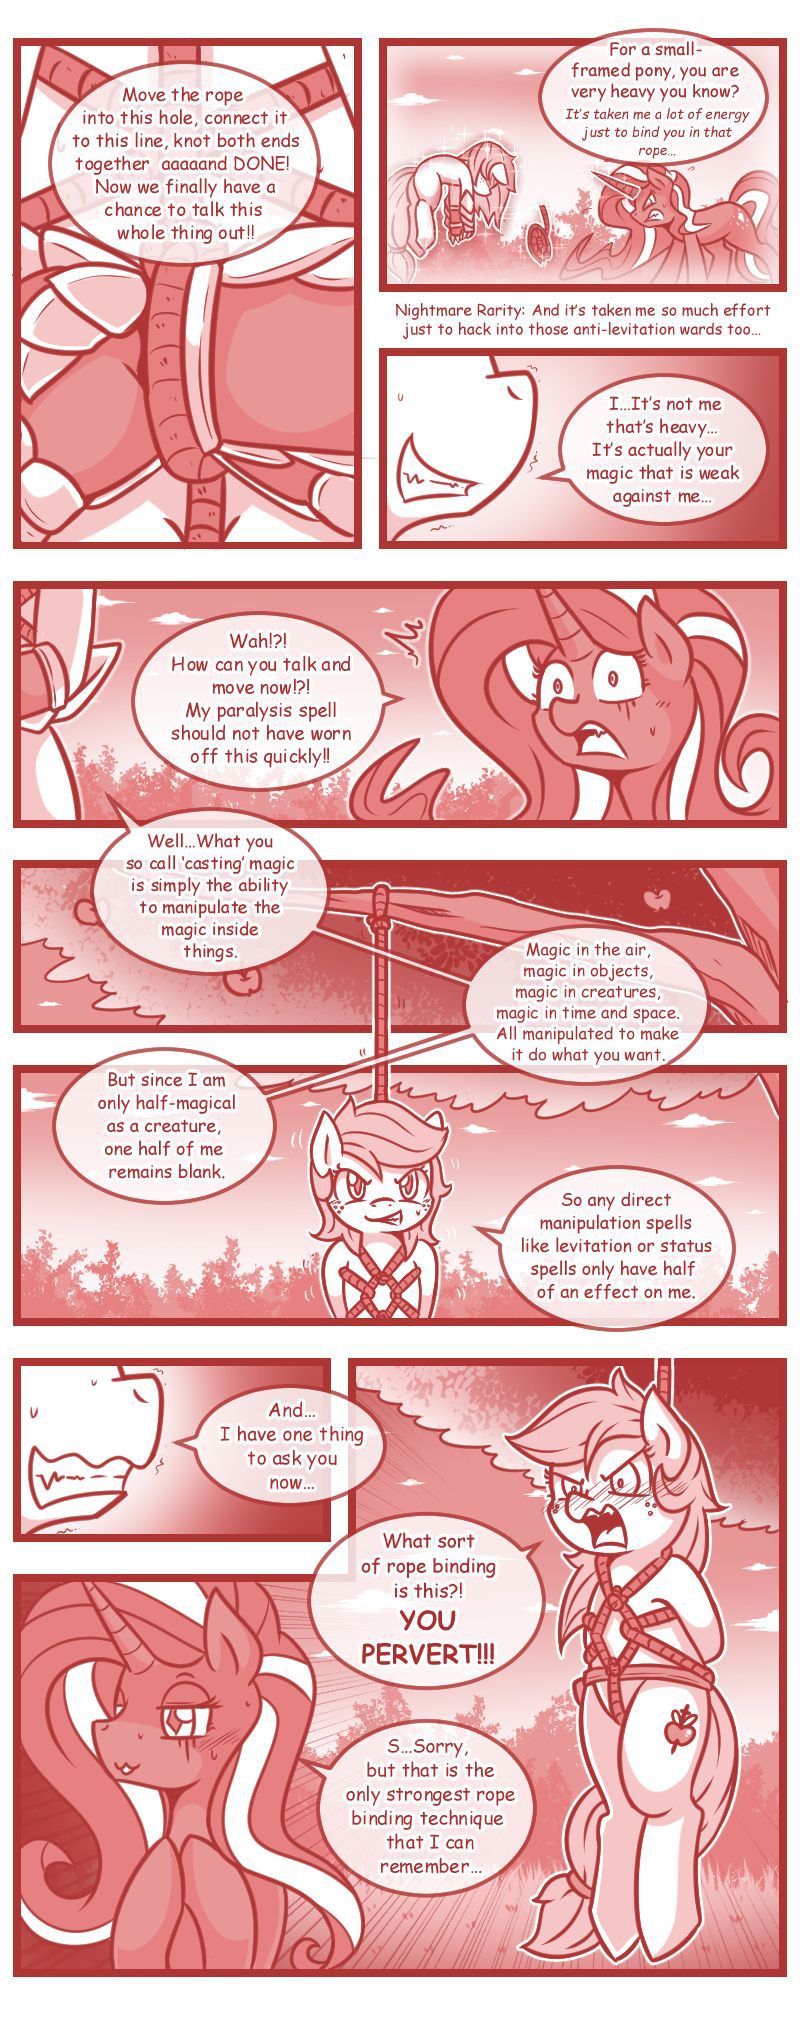 [Vavacung] Chaos Future (My Little Pony: Friendship is Magic) [Ongoing] 42